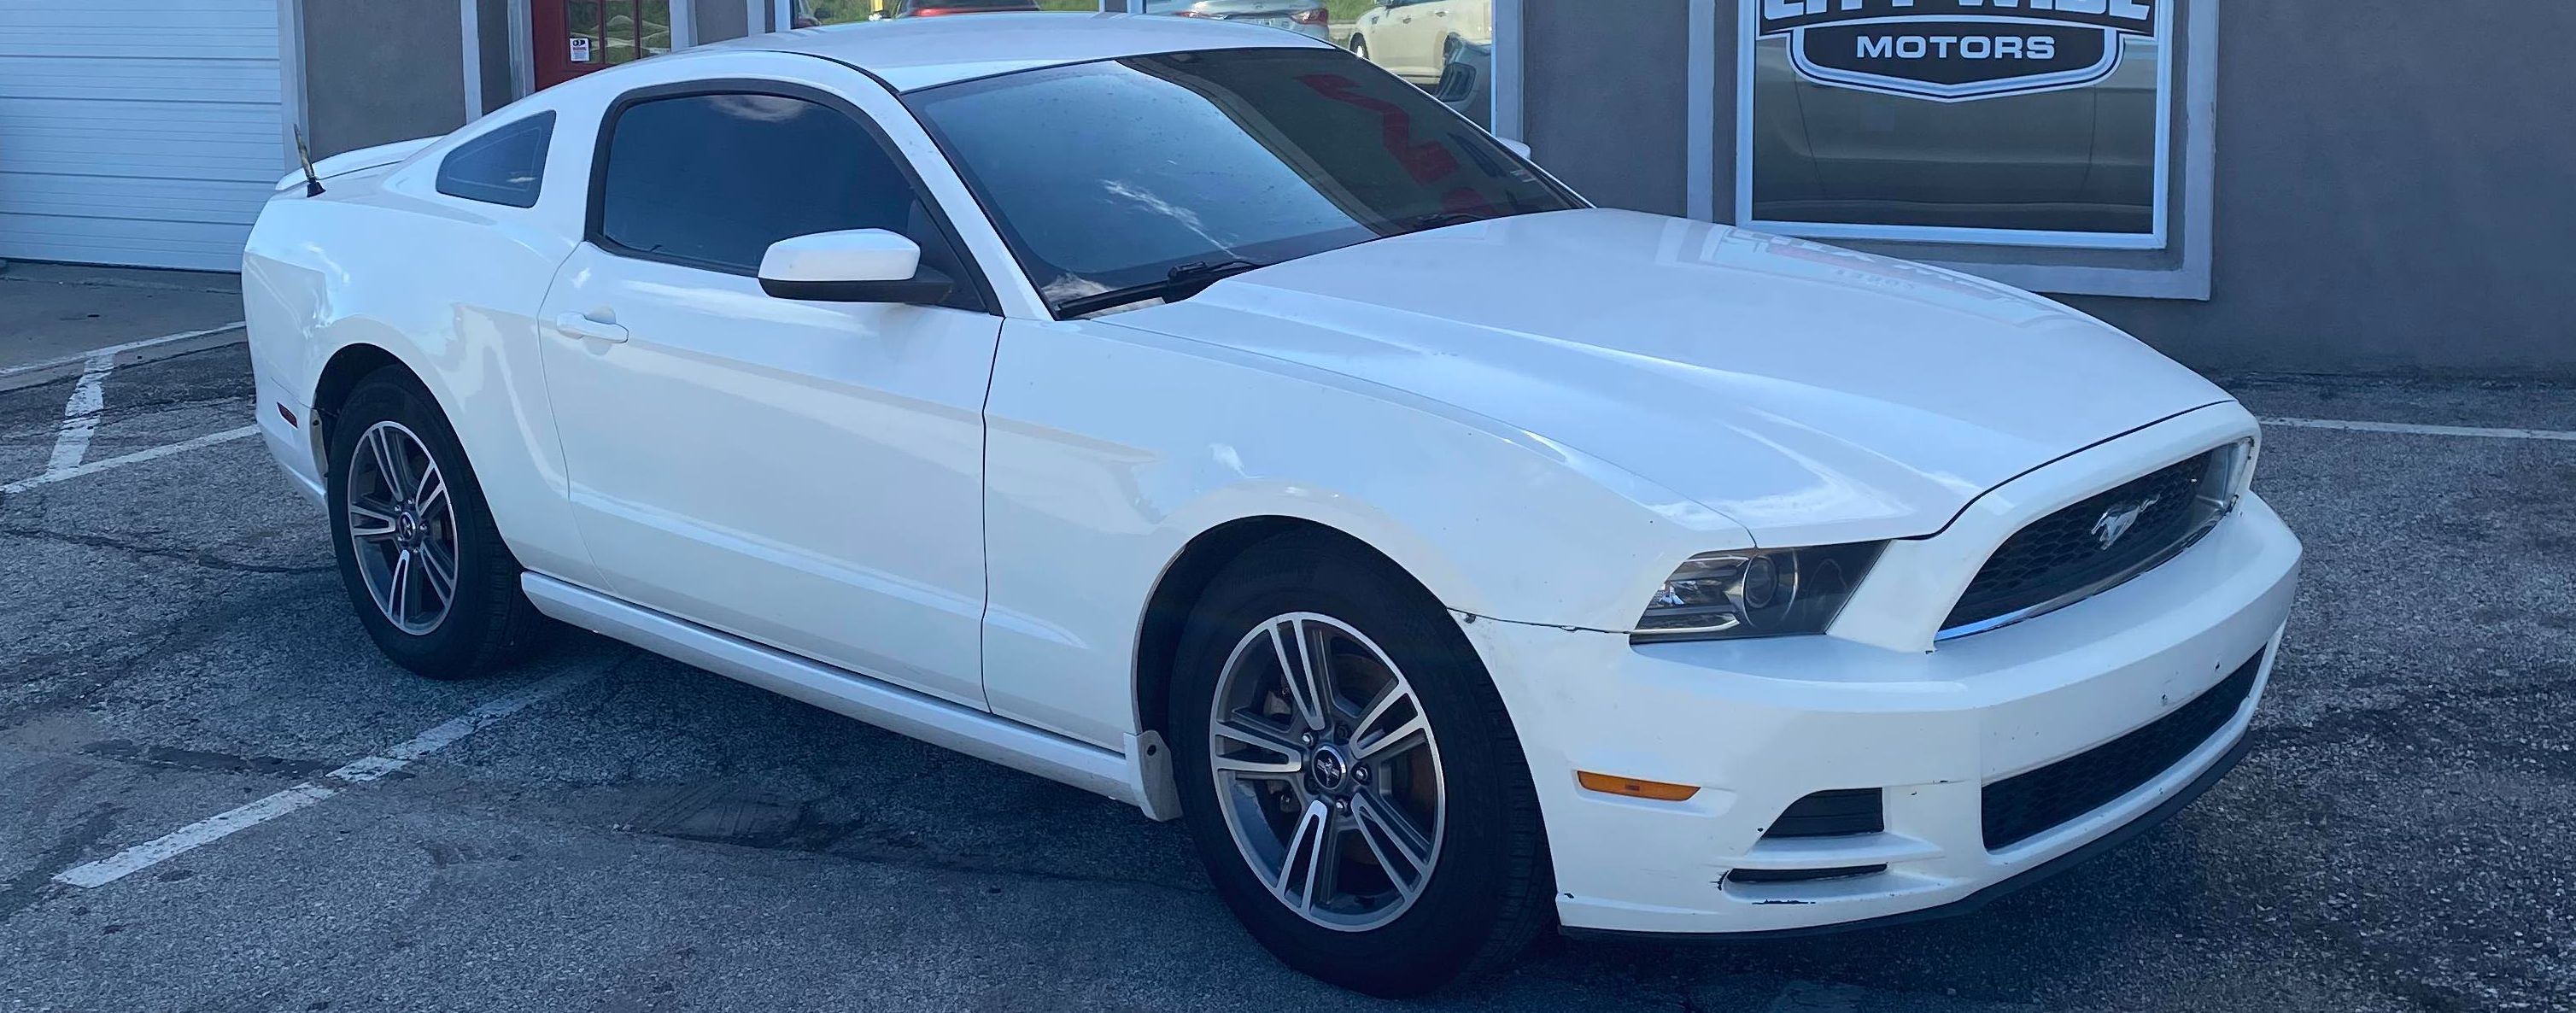 Ford Mustang 2013 White